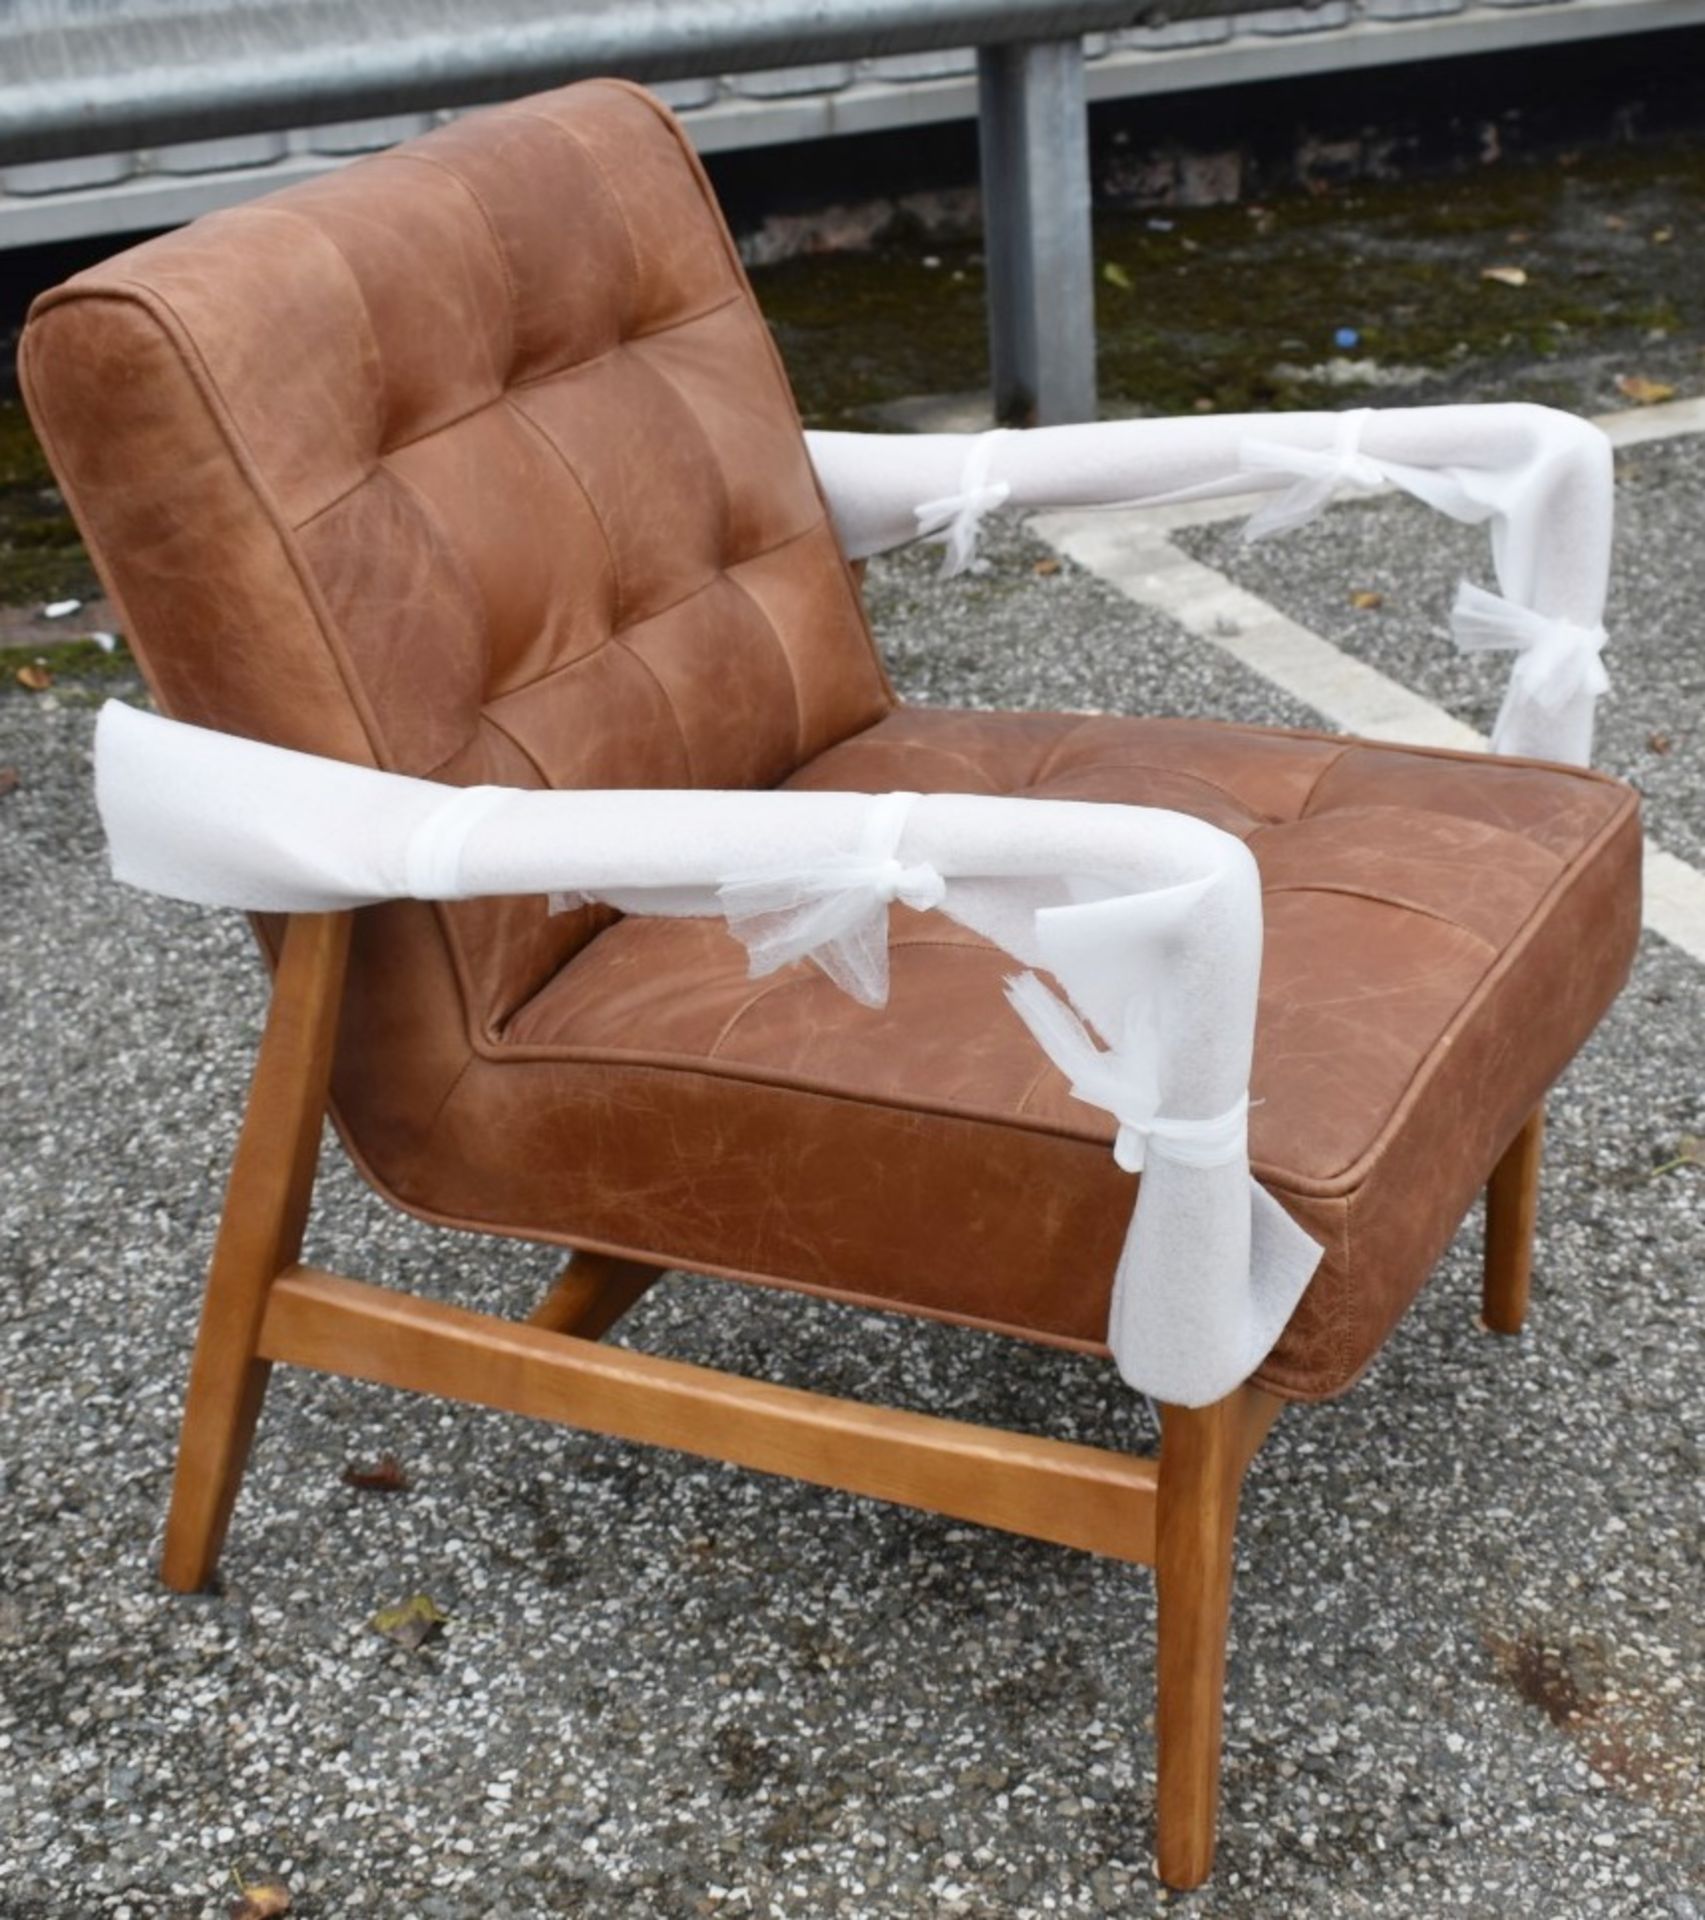 1 x 'Humber' Armchair Upholstered Vintage Brown Leather - New / Unused Stock - CL011 - Location: - Image 3 of 7